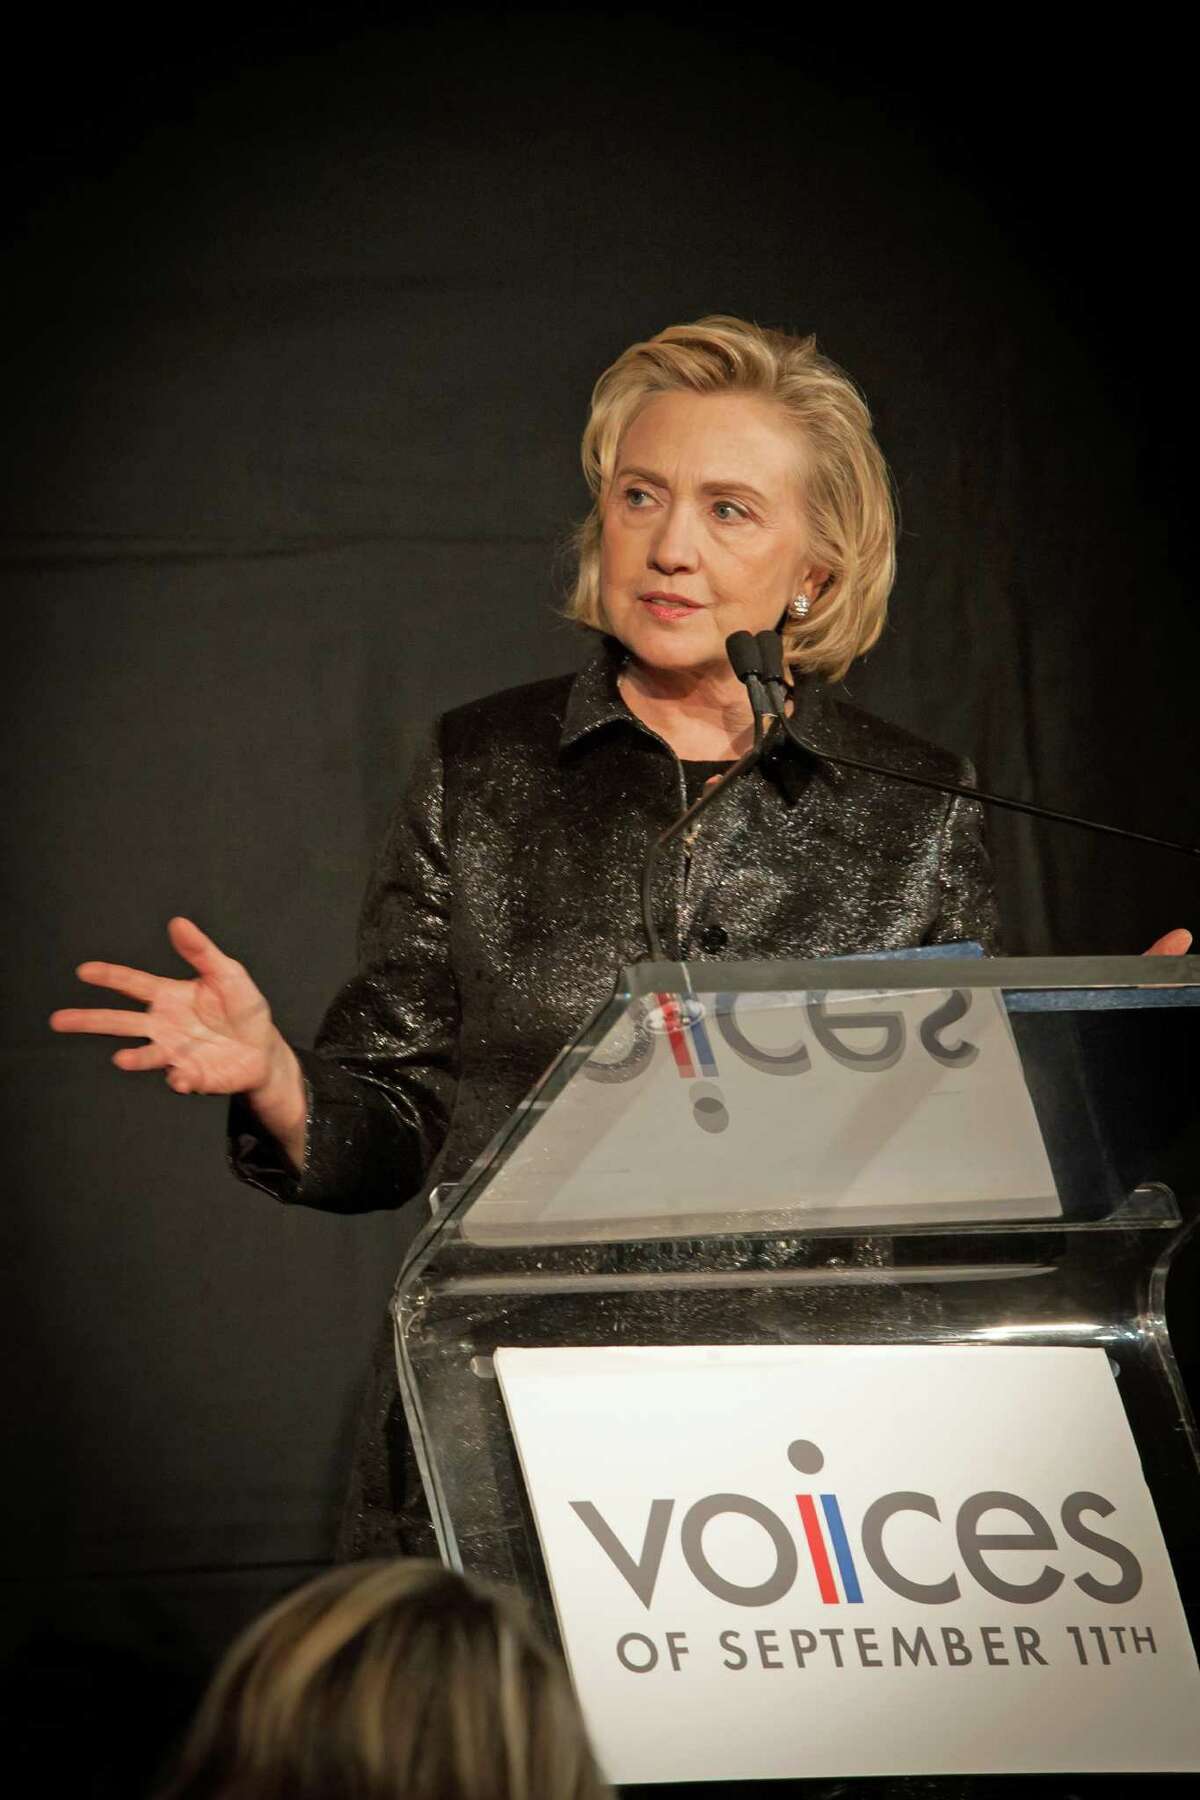 Hillary Clinton was the keynote speaker at the sixth annual Voices of September 11th gala held in New York City on Oct. 16, 2013.